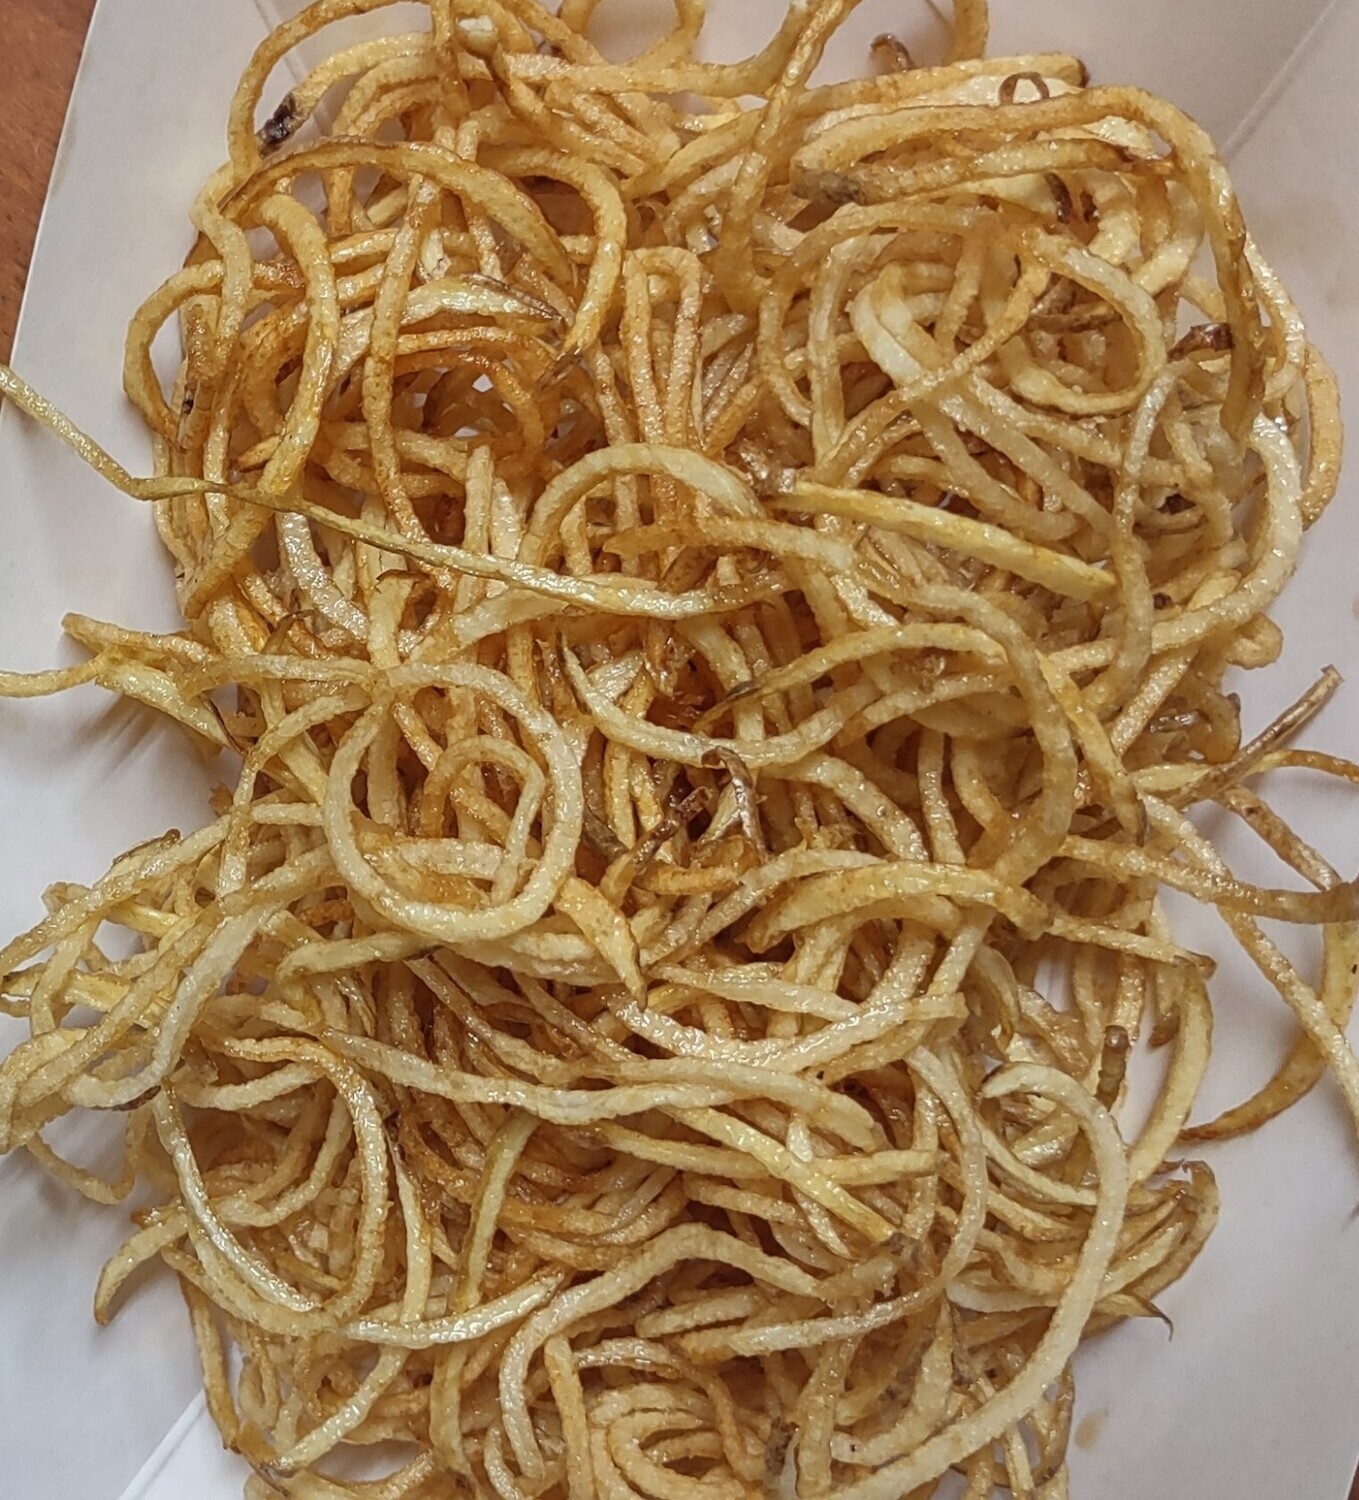 SHOESTRING CURLY FRIES